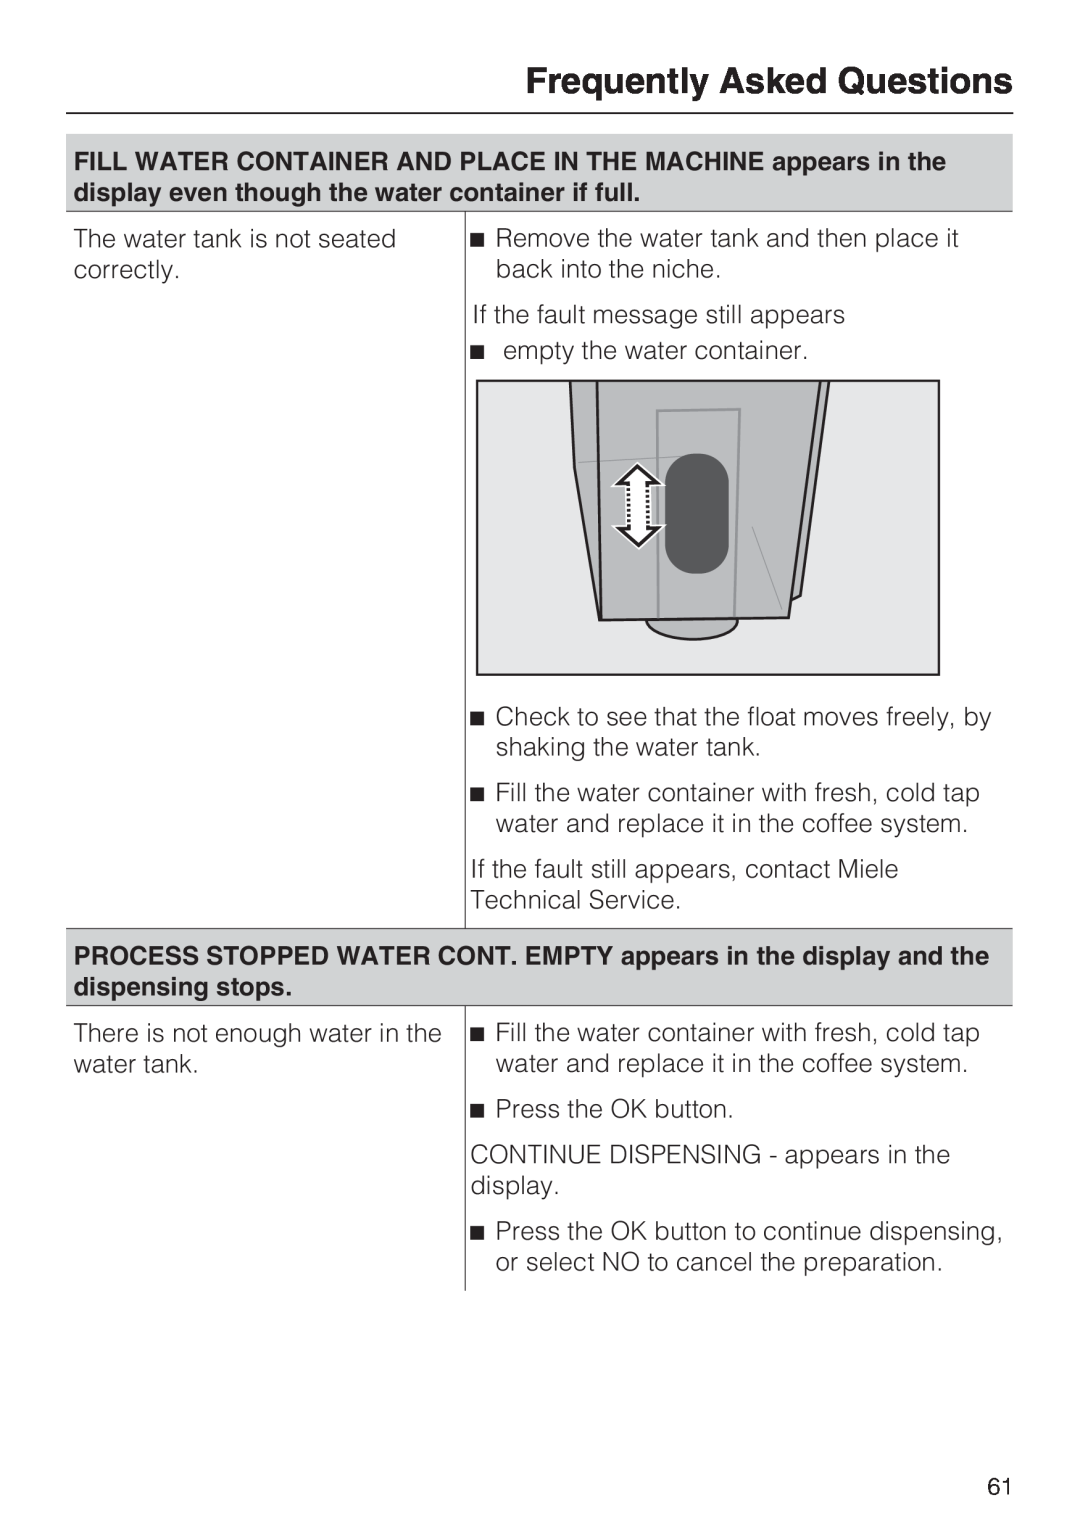 Miele CM 5000 operating instructions Frequently Asked Questions, The water tank is not seated correctly 